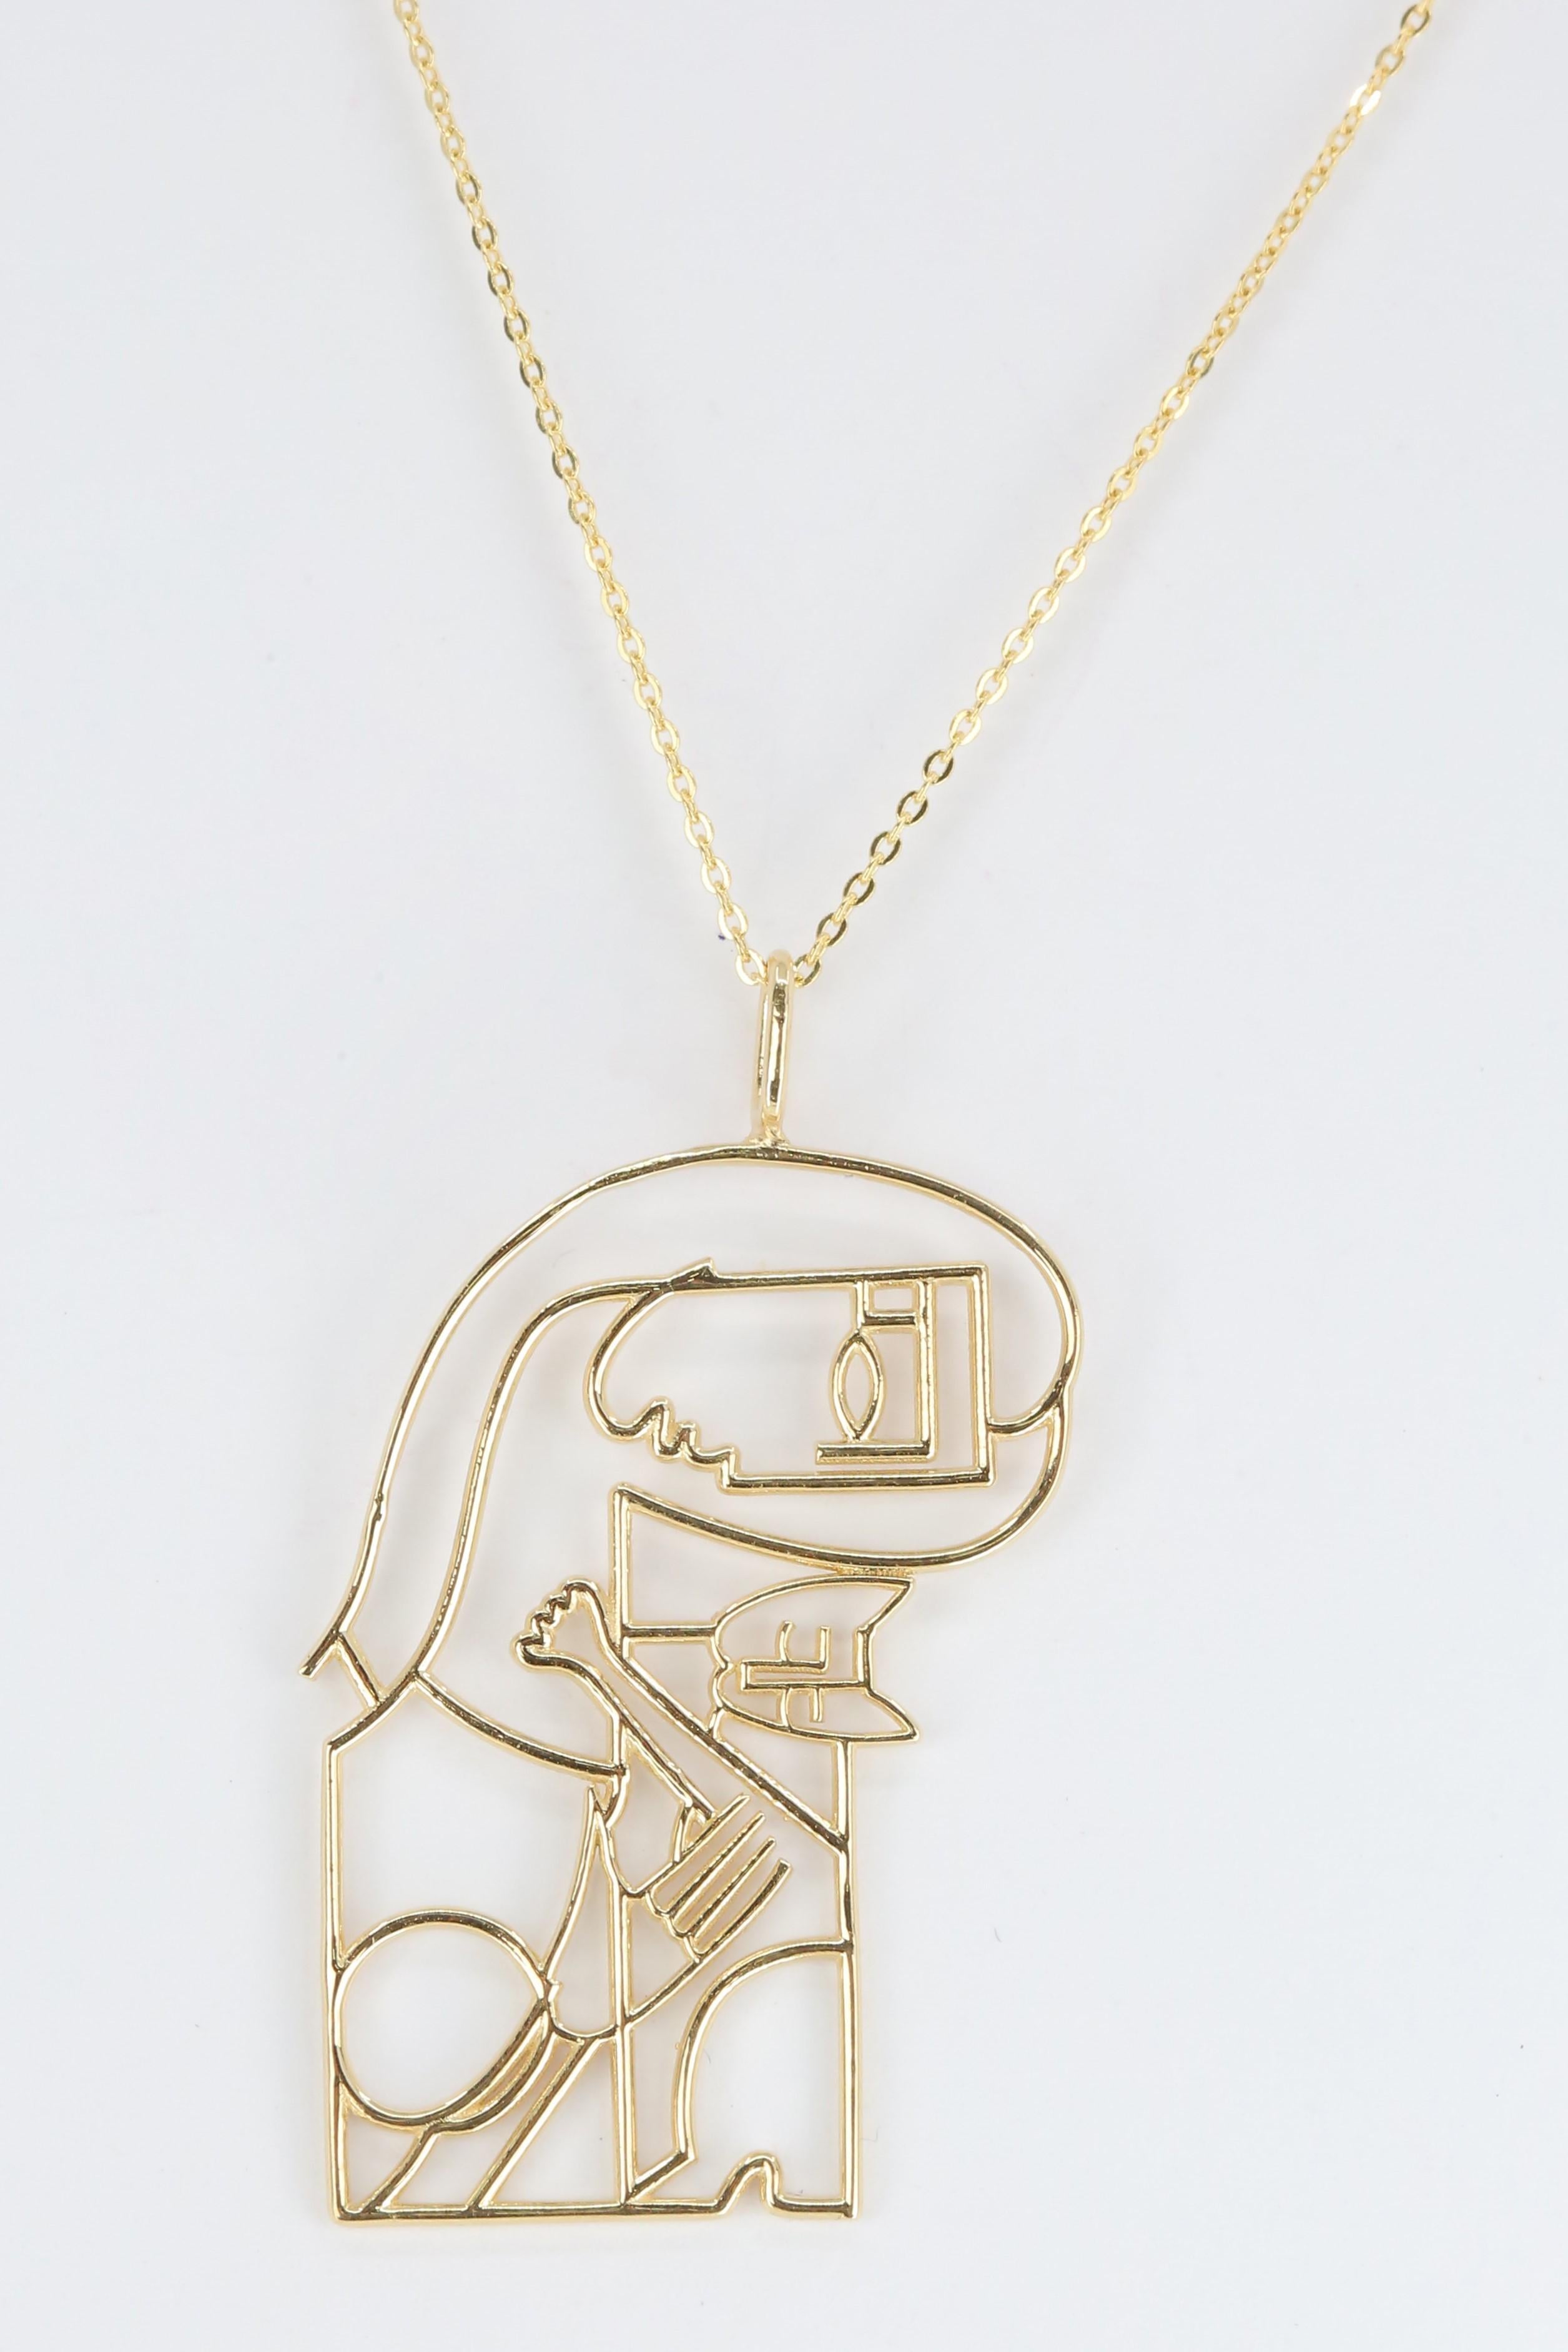 Modern 14K Gold Woman with a Cat Pendant Necklace, Inspired by Jiri Petr For Sale